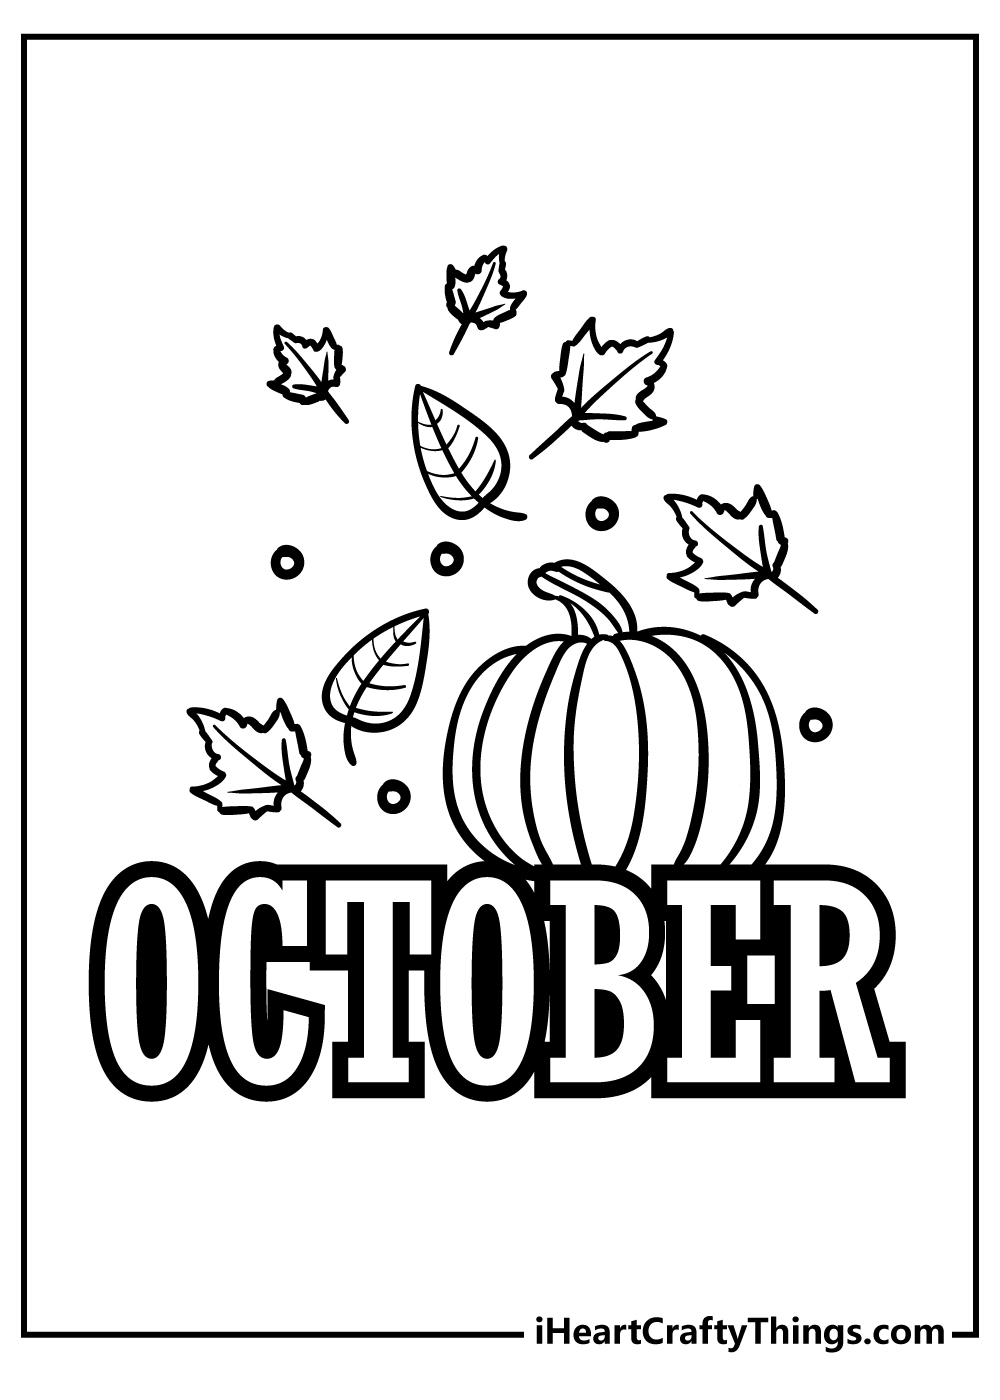 October Coloring Book for kids free printable